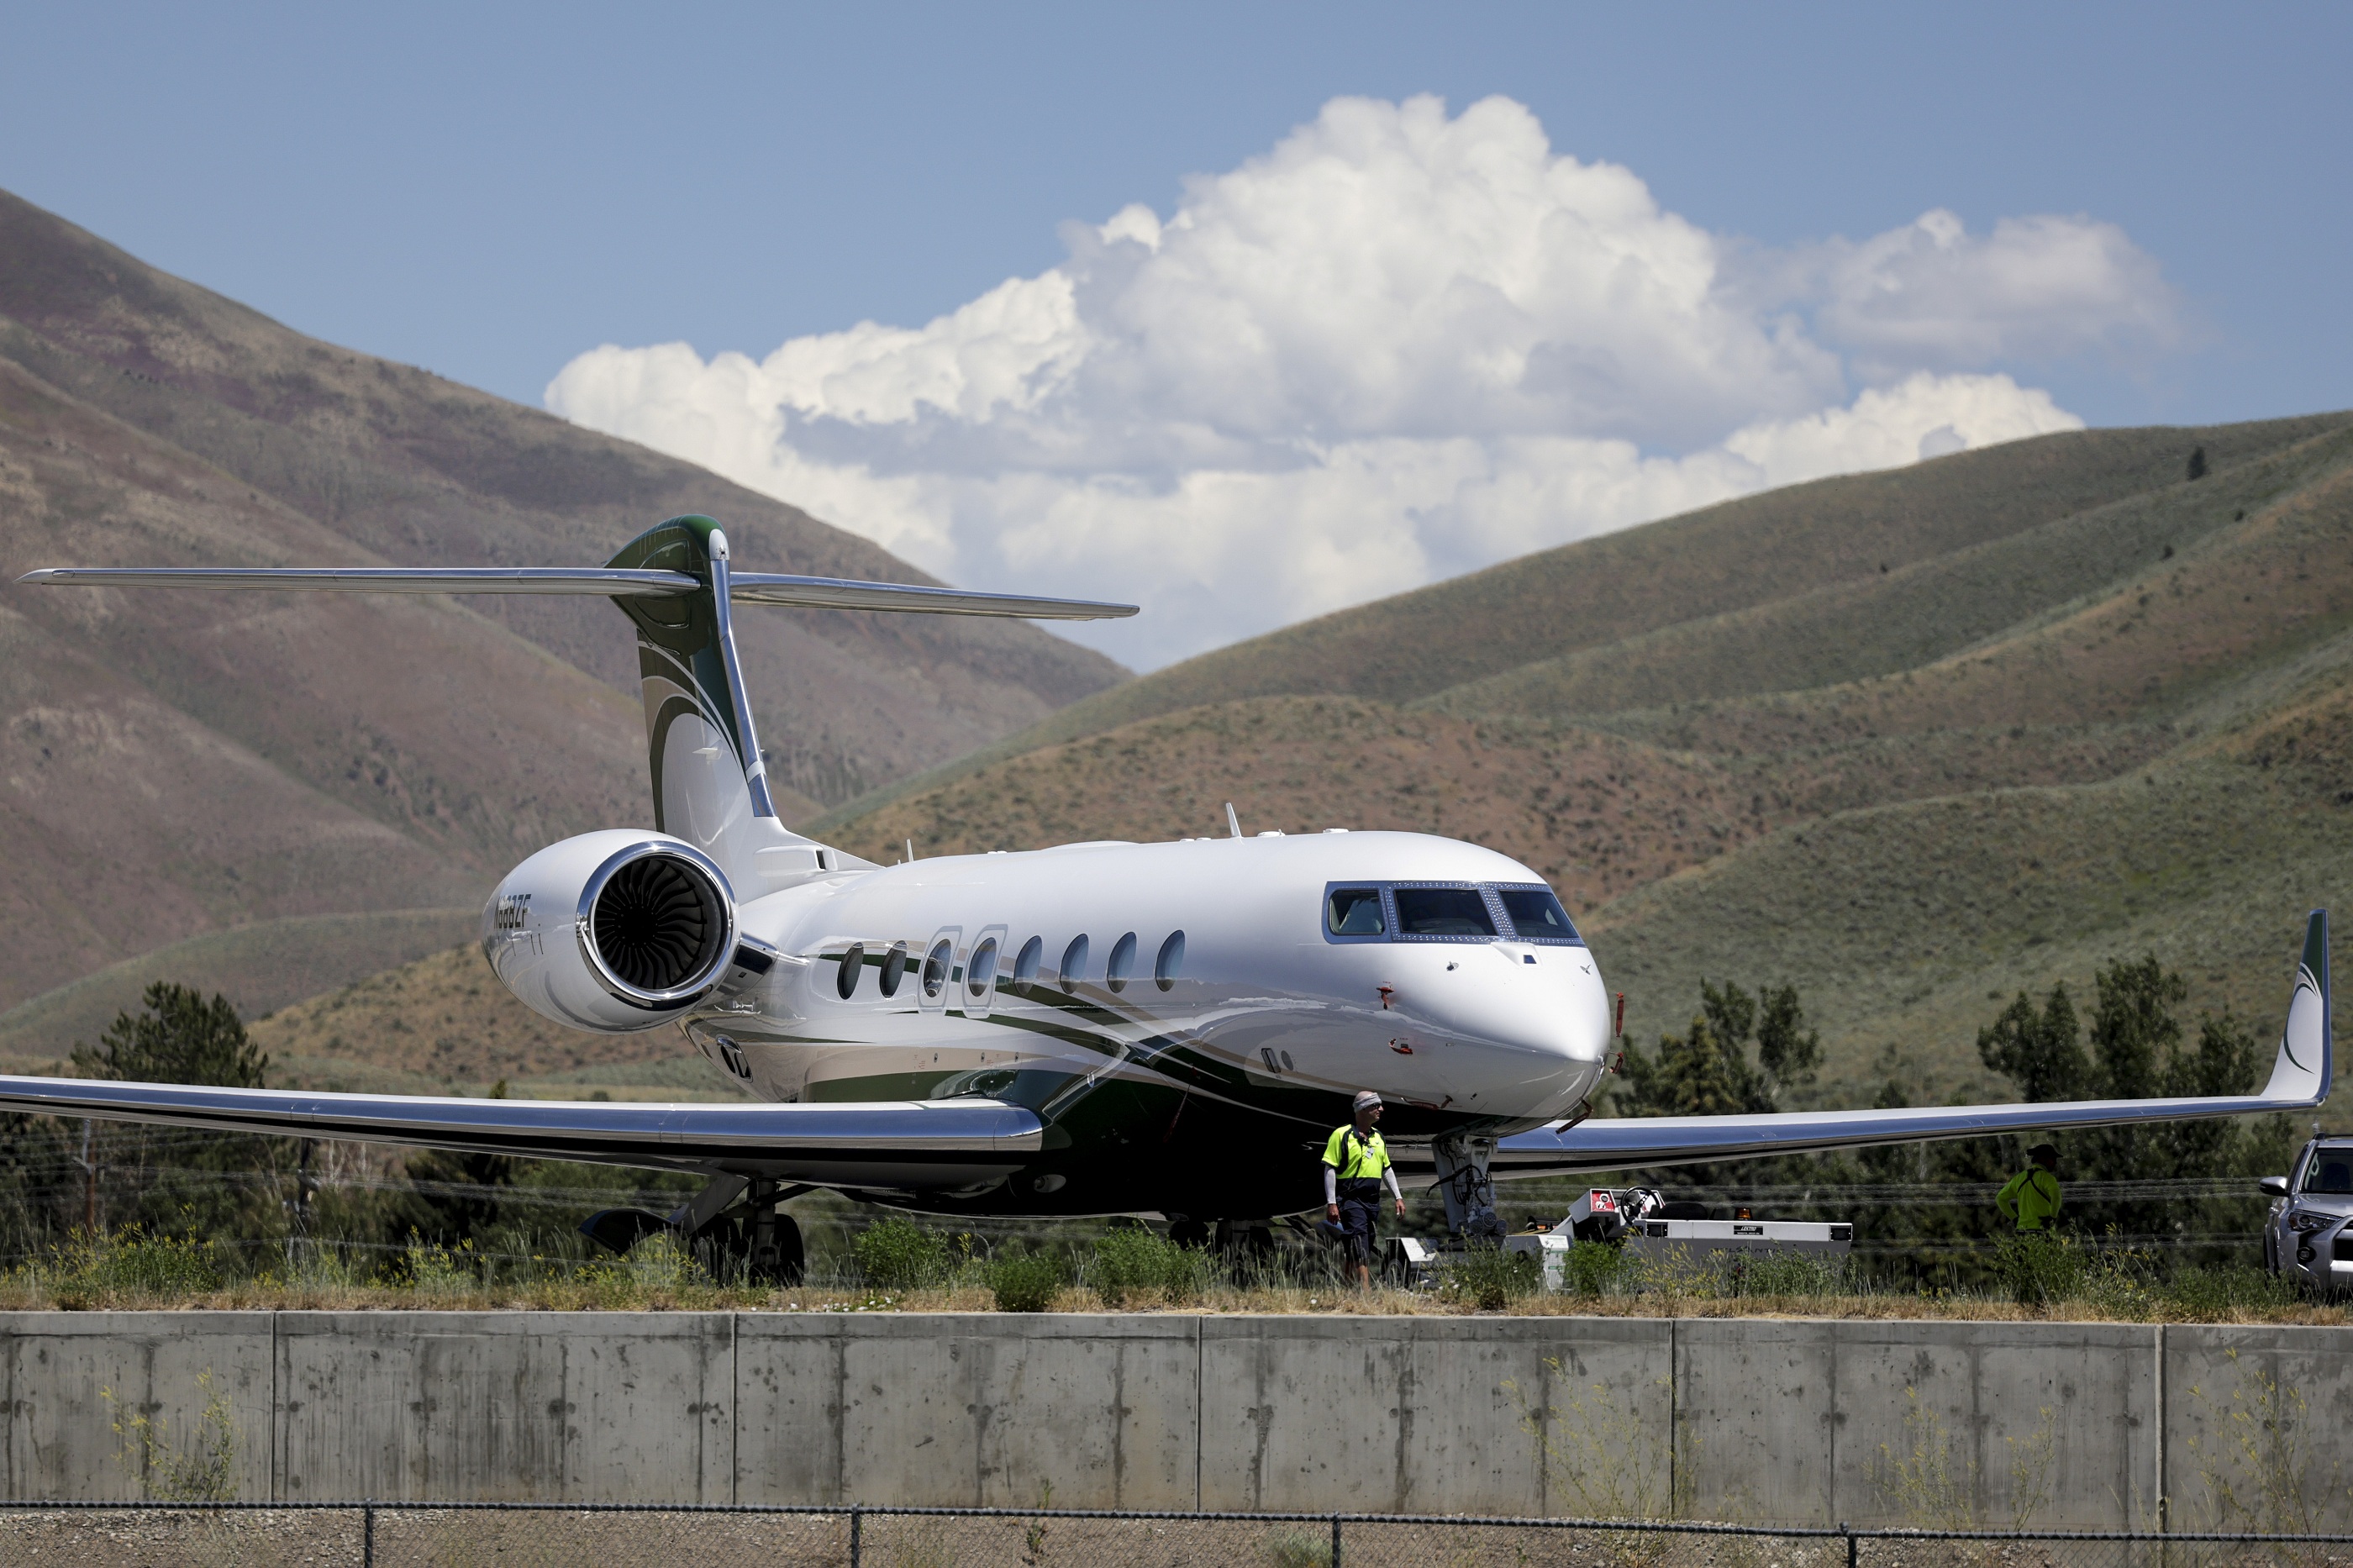 Private Jets Will Survive, But Using Them Will Likely Cost More - Bloomberg